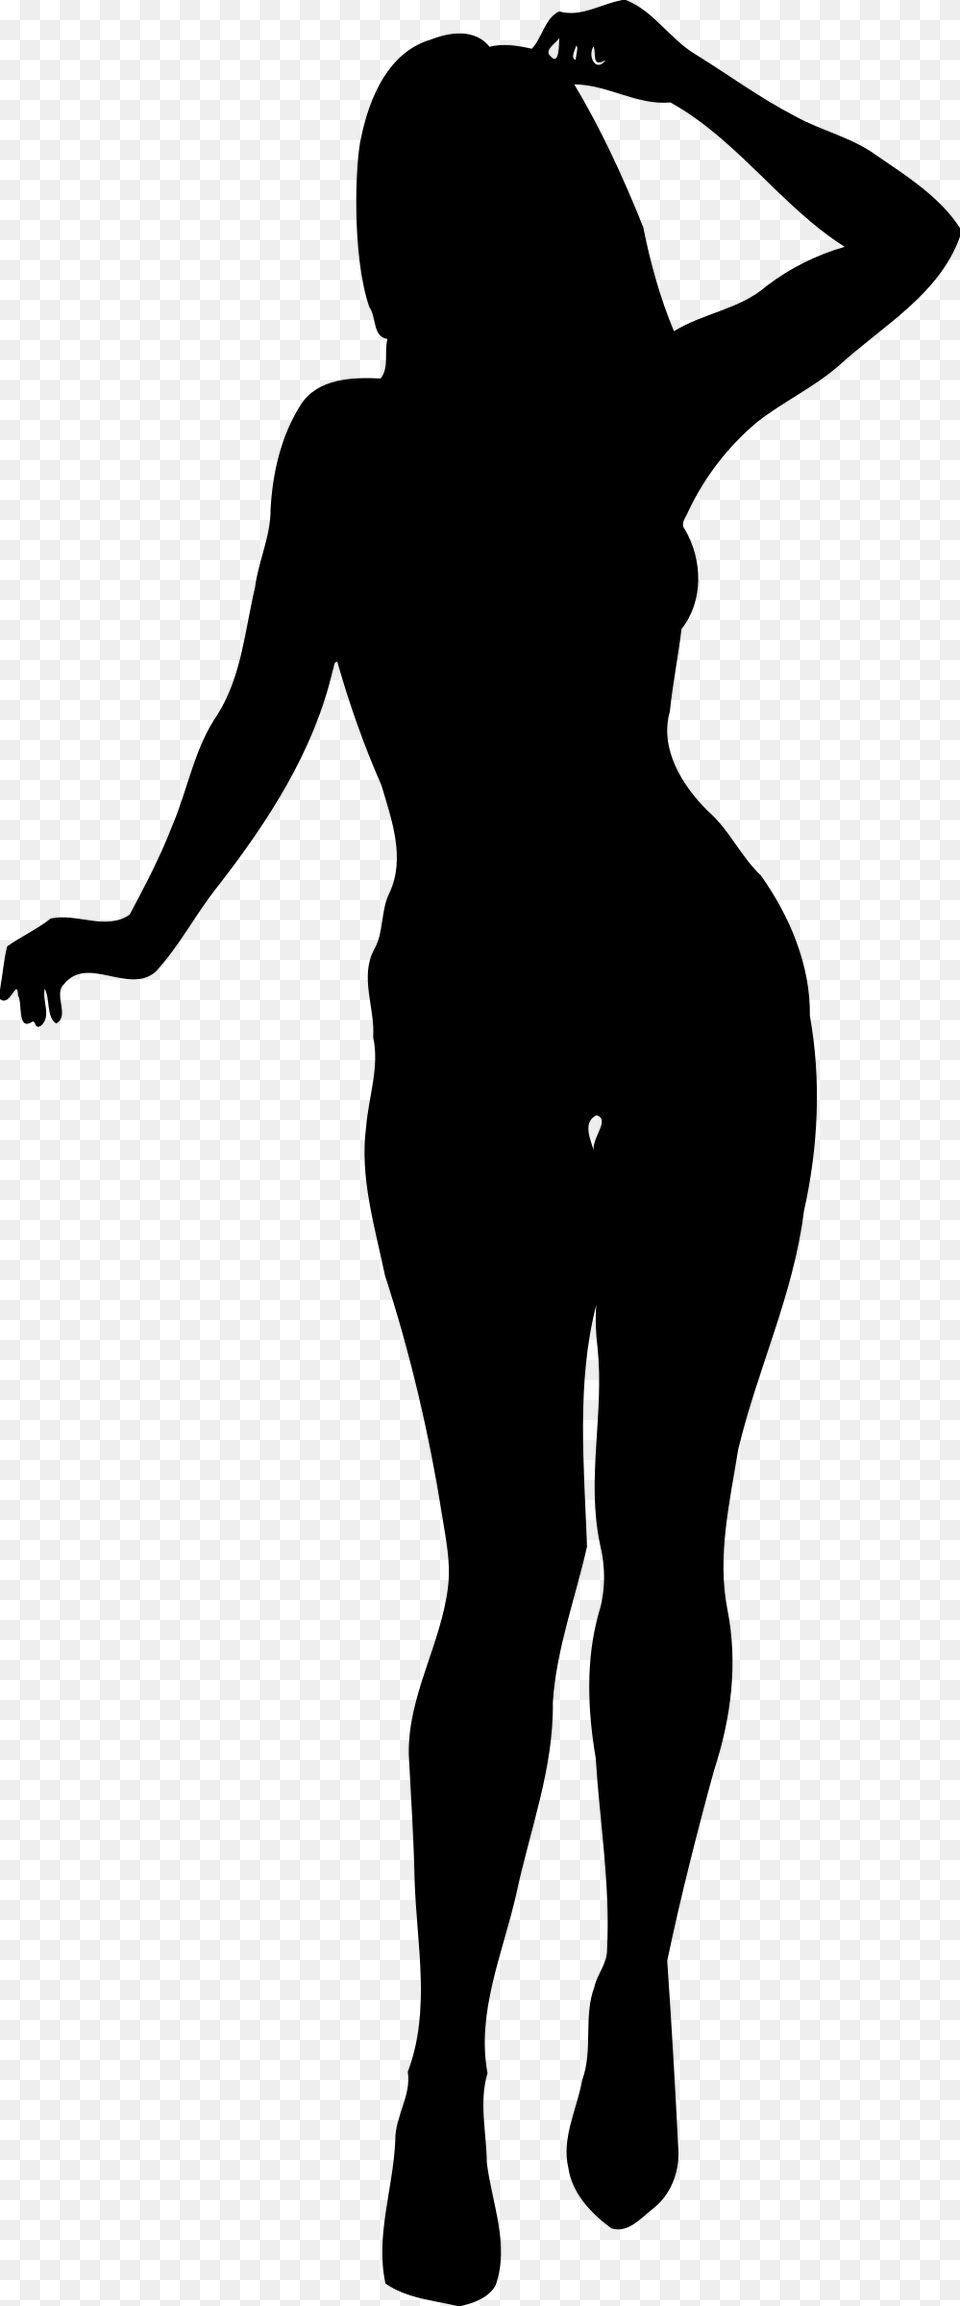 This Icons Design Of Woman Silhouette, Gray Free Png Download